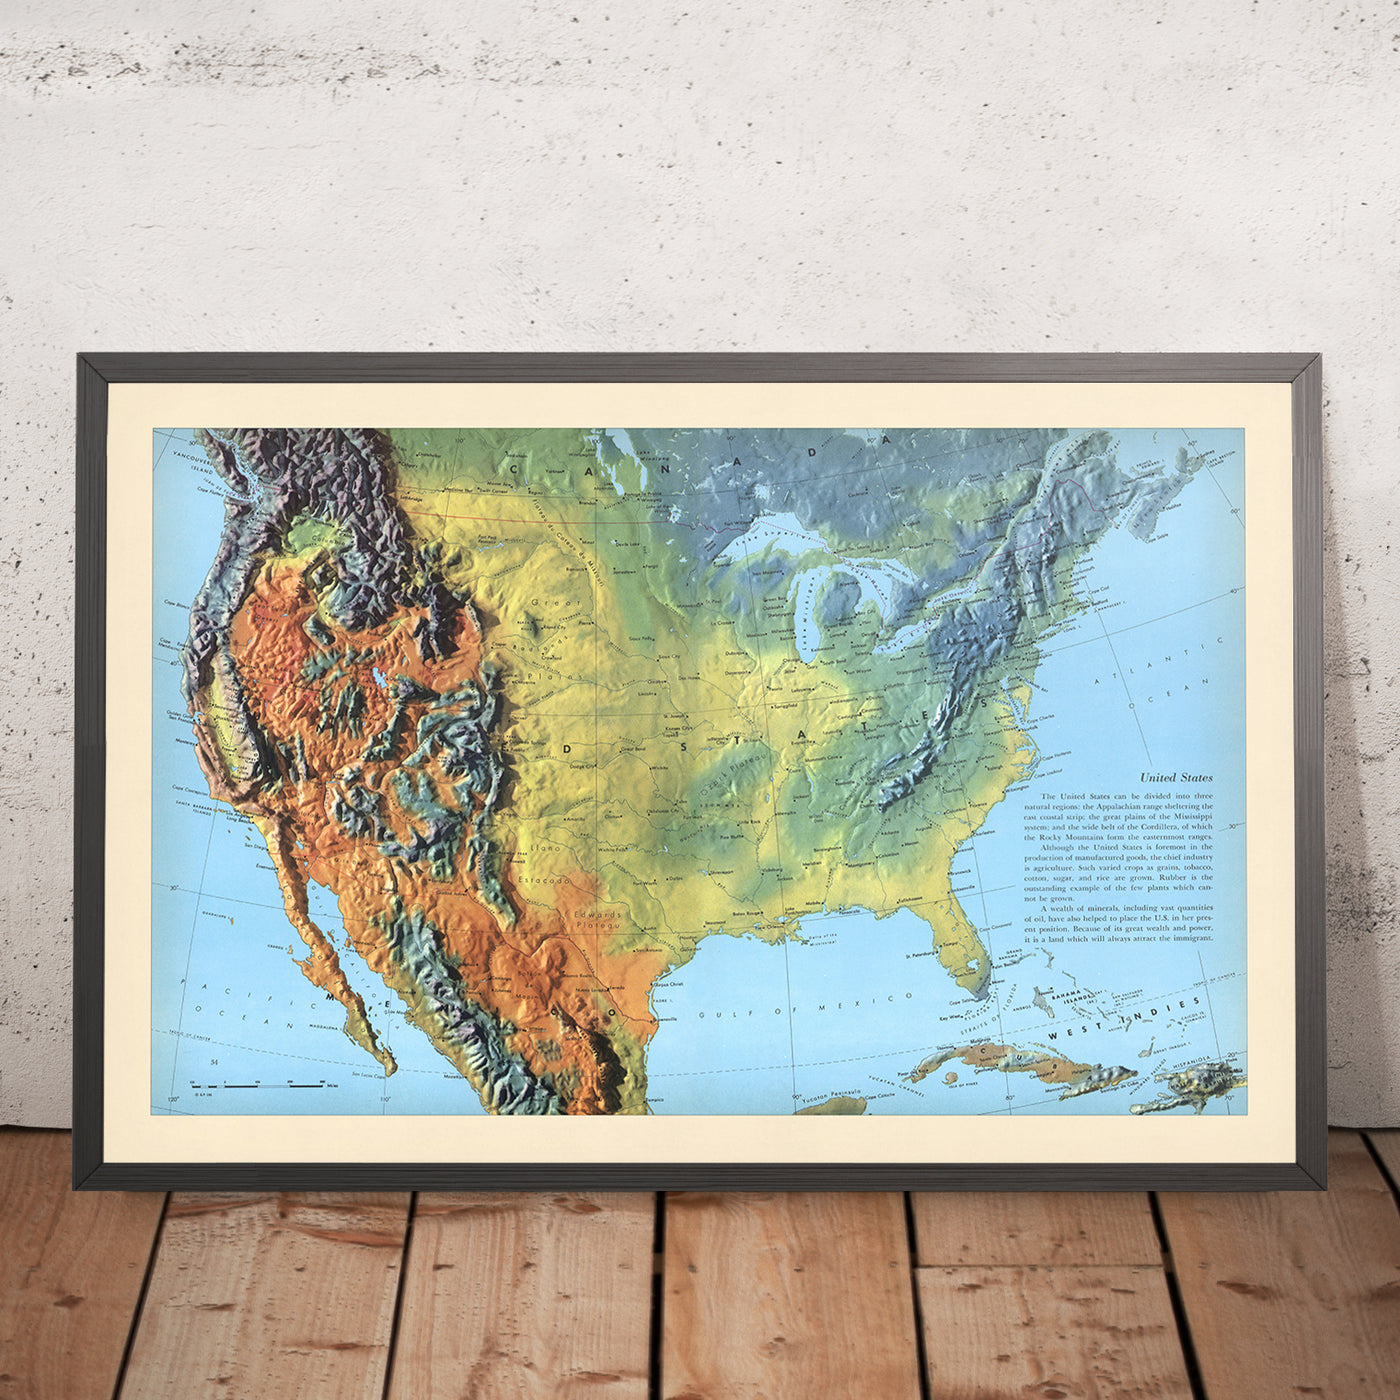 Old Shadow Relief Map of North America by Debenham, 1958: Detailed Relief, Mountain Ranges